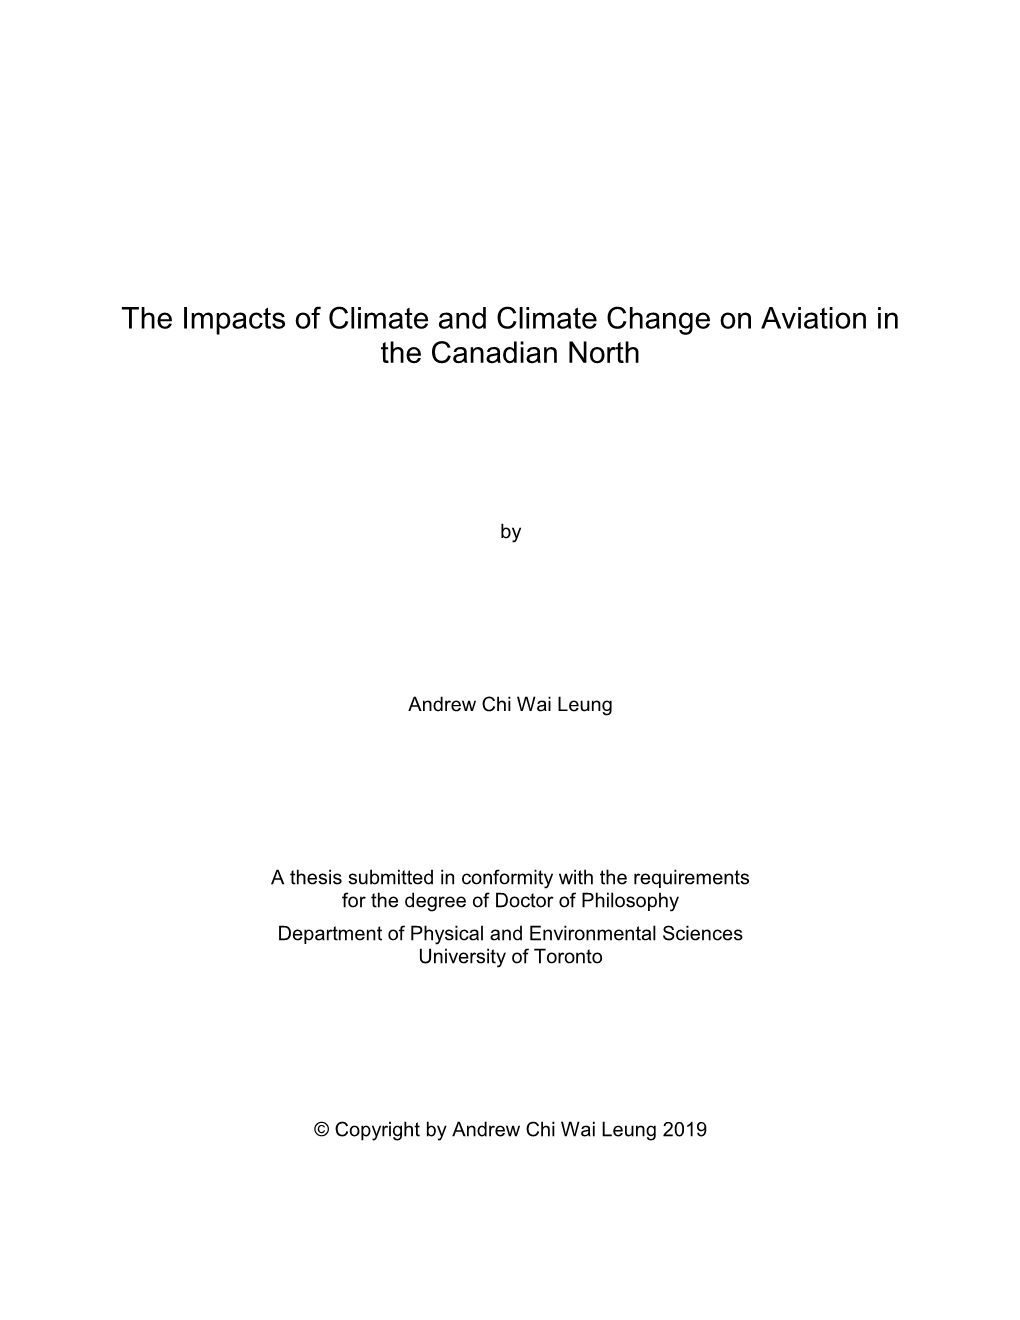 The Impacts of Climate and Climate Change on Aviation in the Canadian North